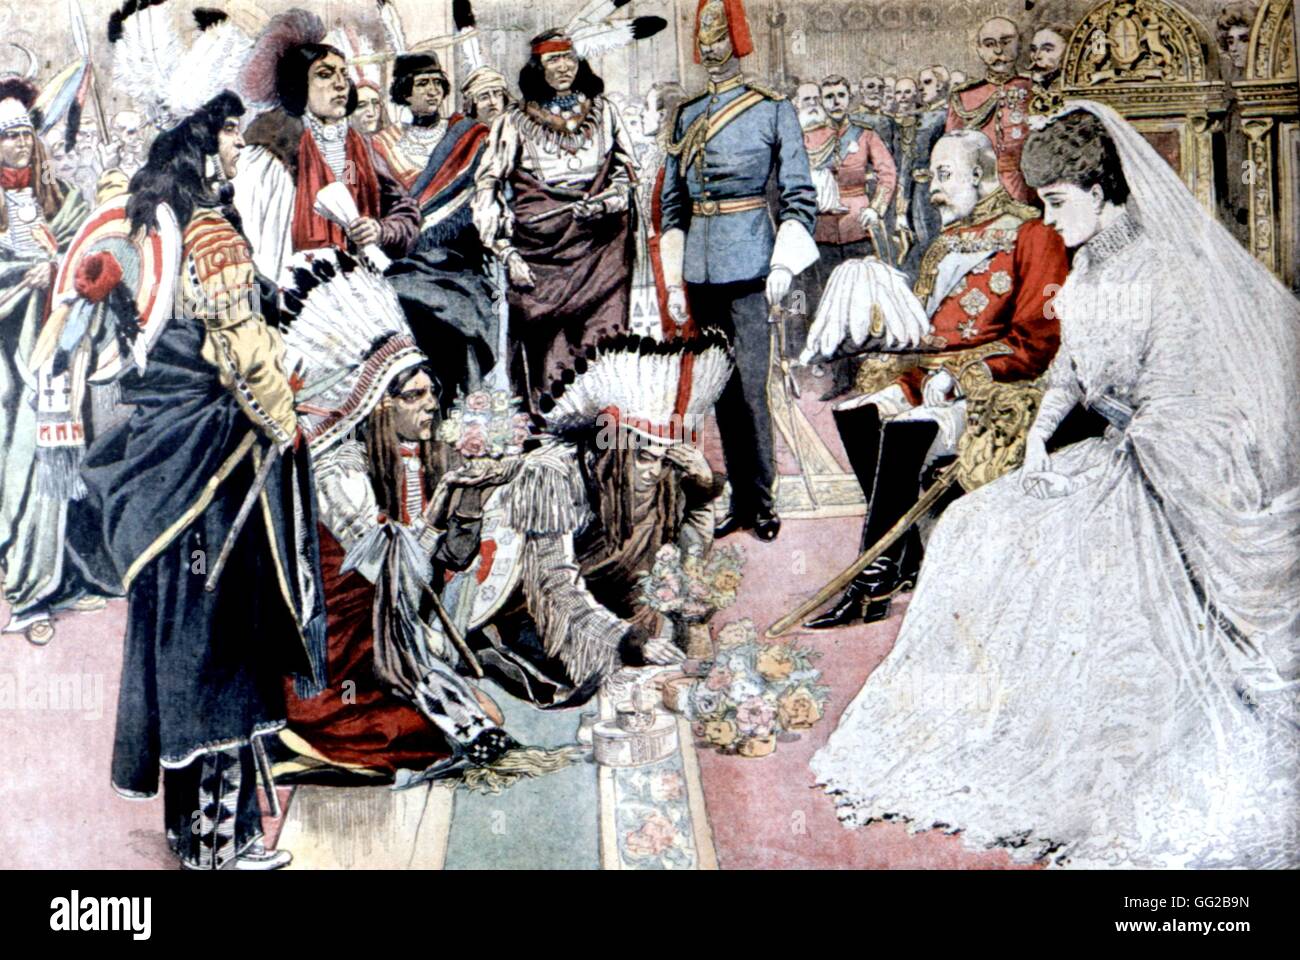 King Edward VII (1841-1910) receiving the Indian chiefs, in 'Le Petit Journal' c. 1900 England  Rousseau collection Stock Photo